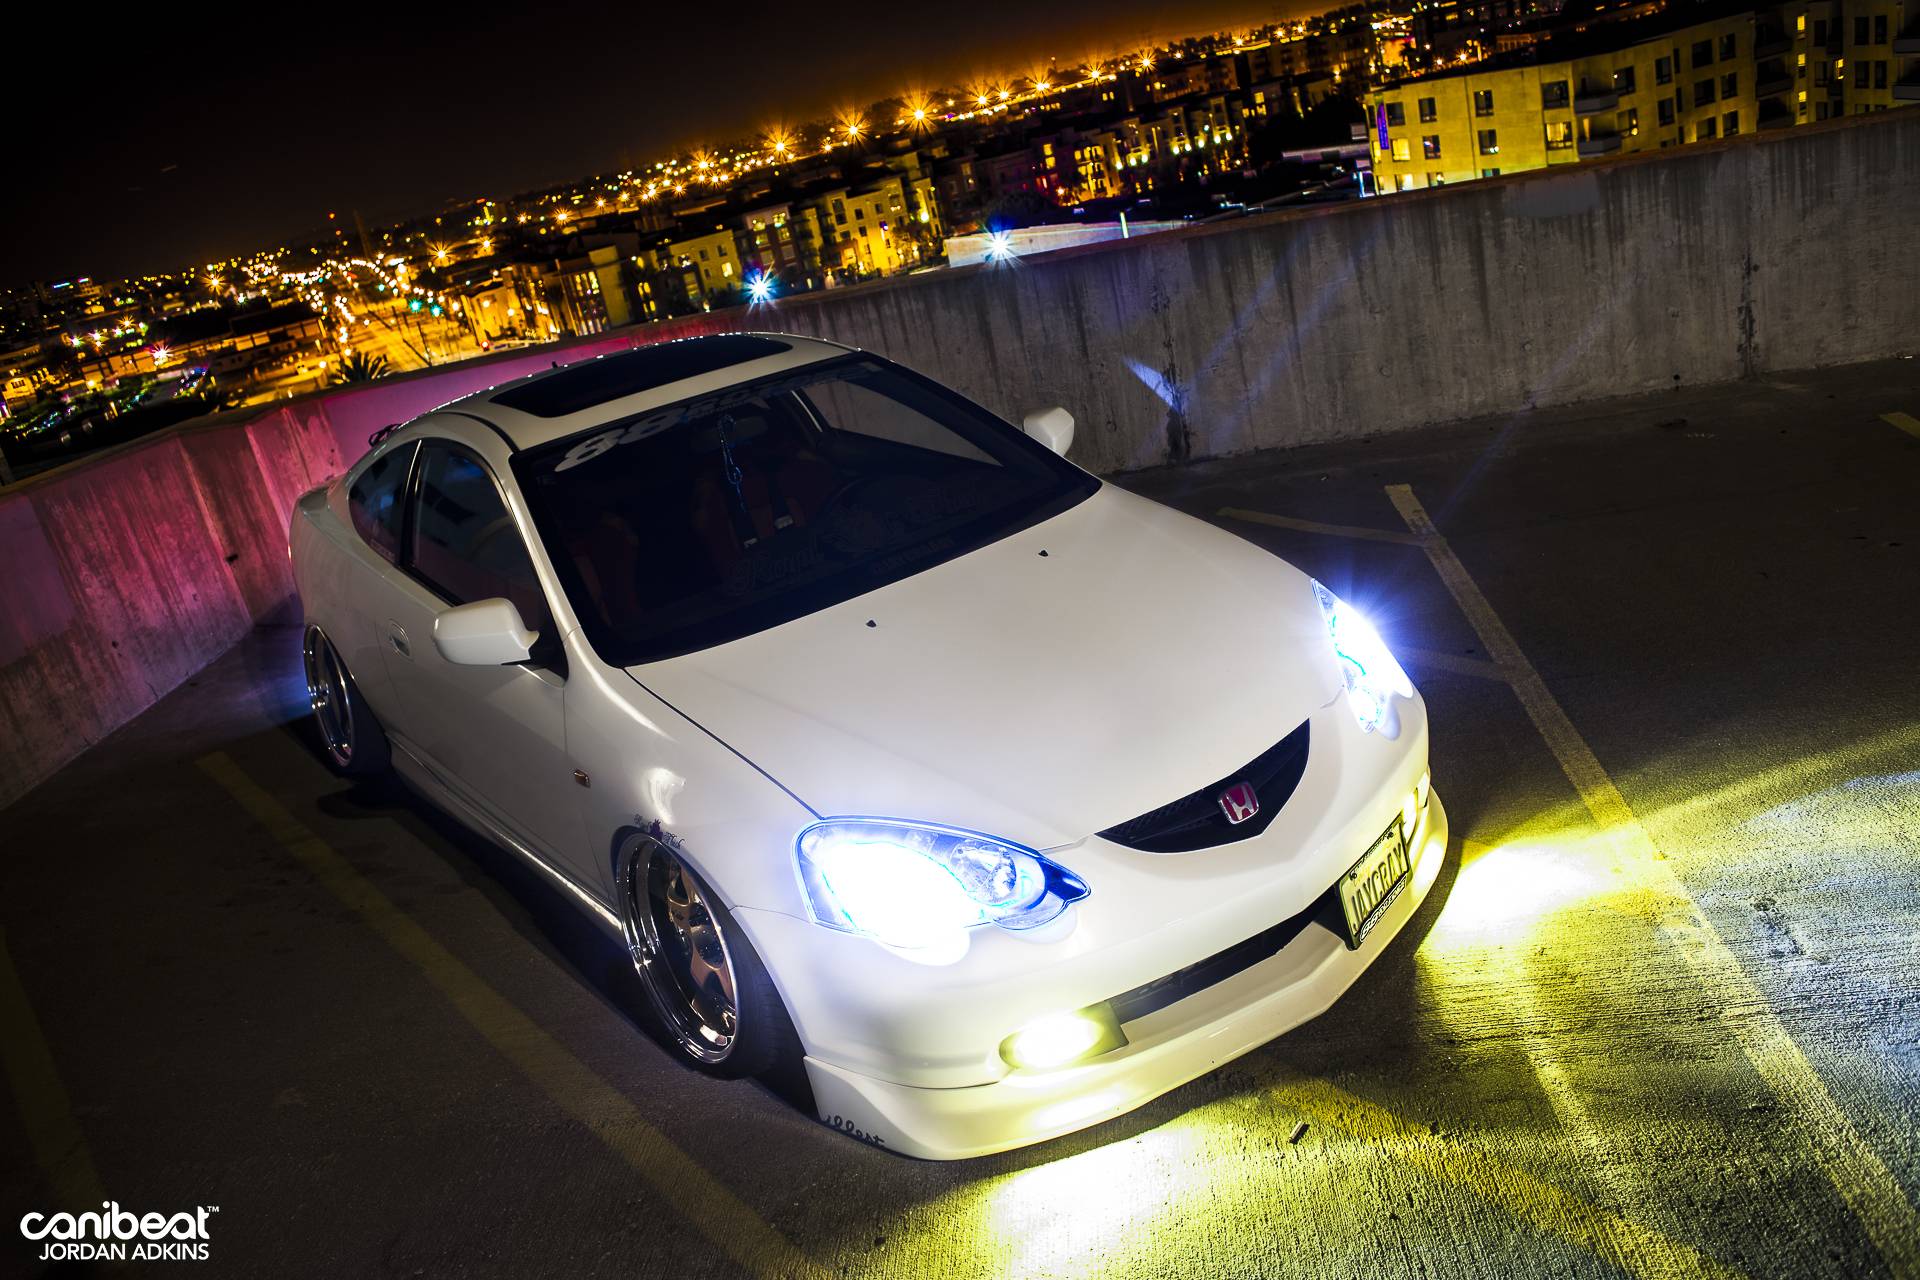 Free Download Acura Rsx Wallpapers 1920x1280 For Your Desktop Mobile Tablet Explore 76 Rsx Wallpaper Acura Rsx Wallpaper Acura Rsx Type S Wallpaper